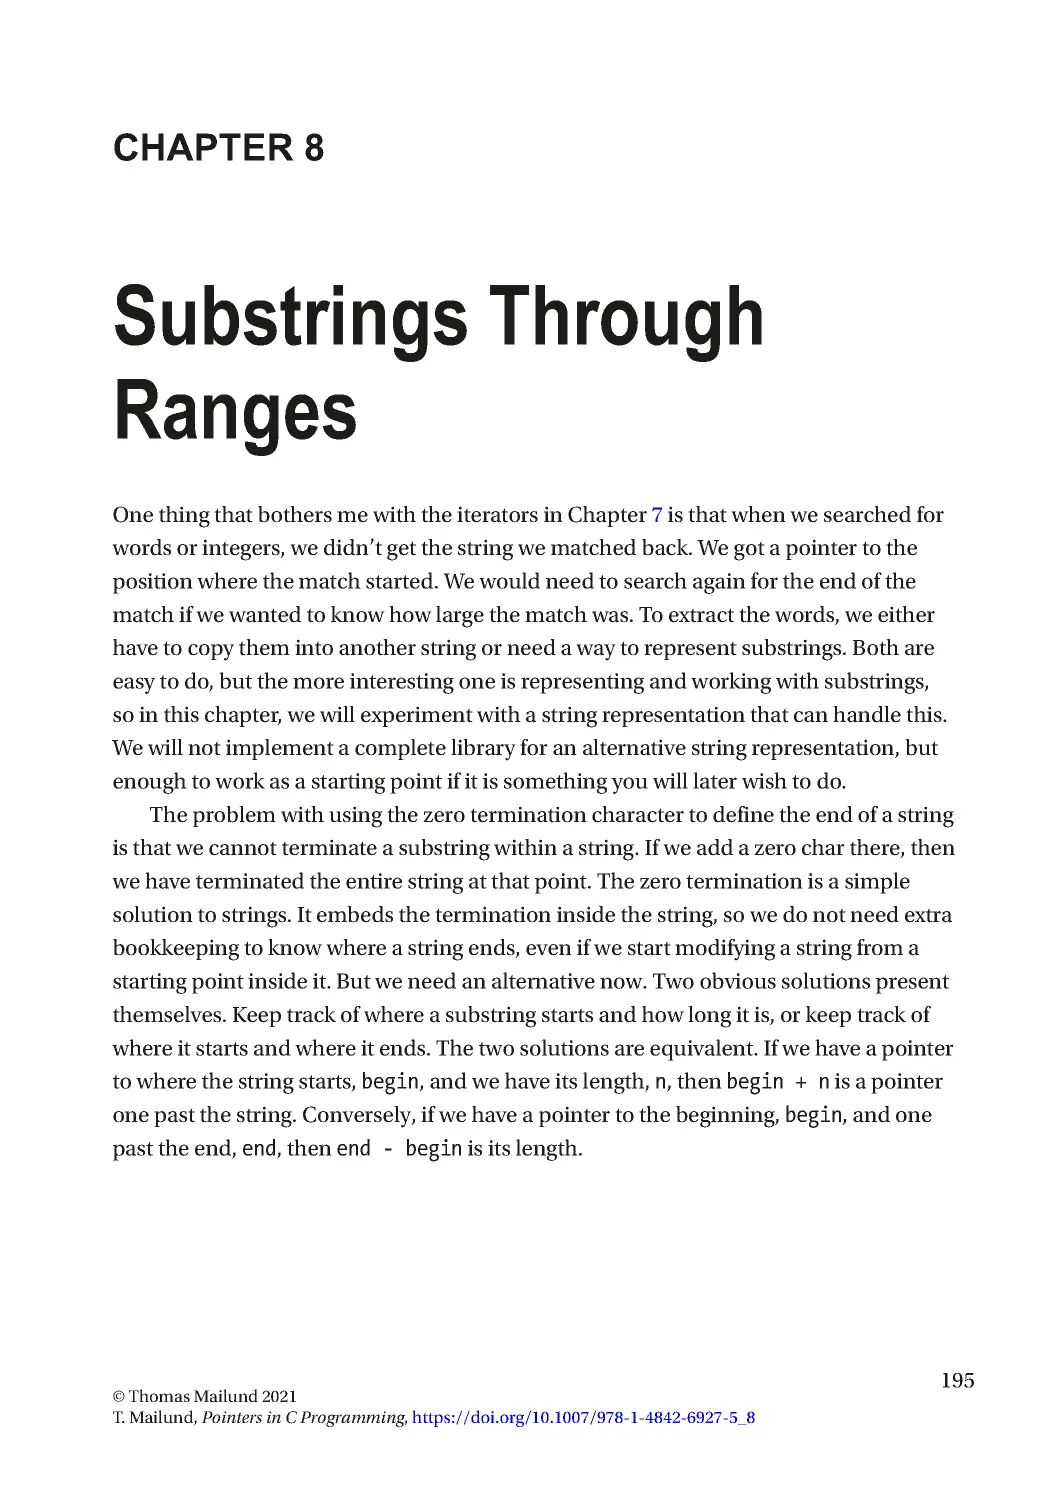 Chapter 8: Substrings Through Ranges